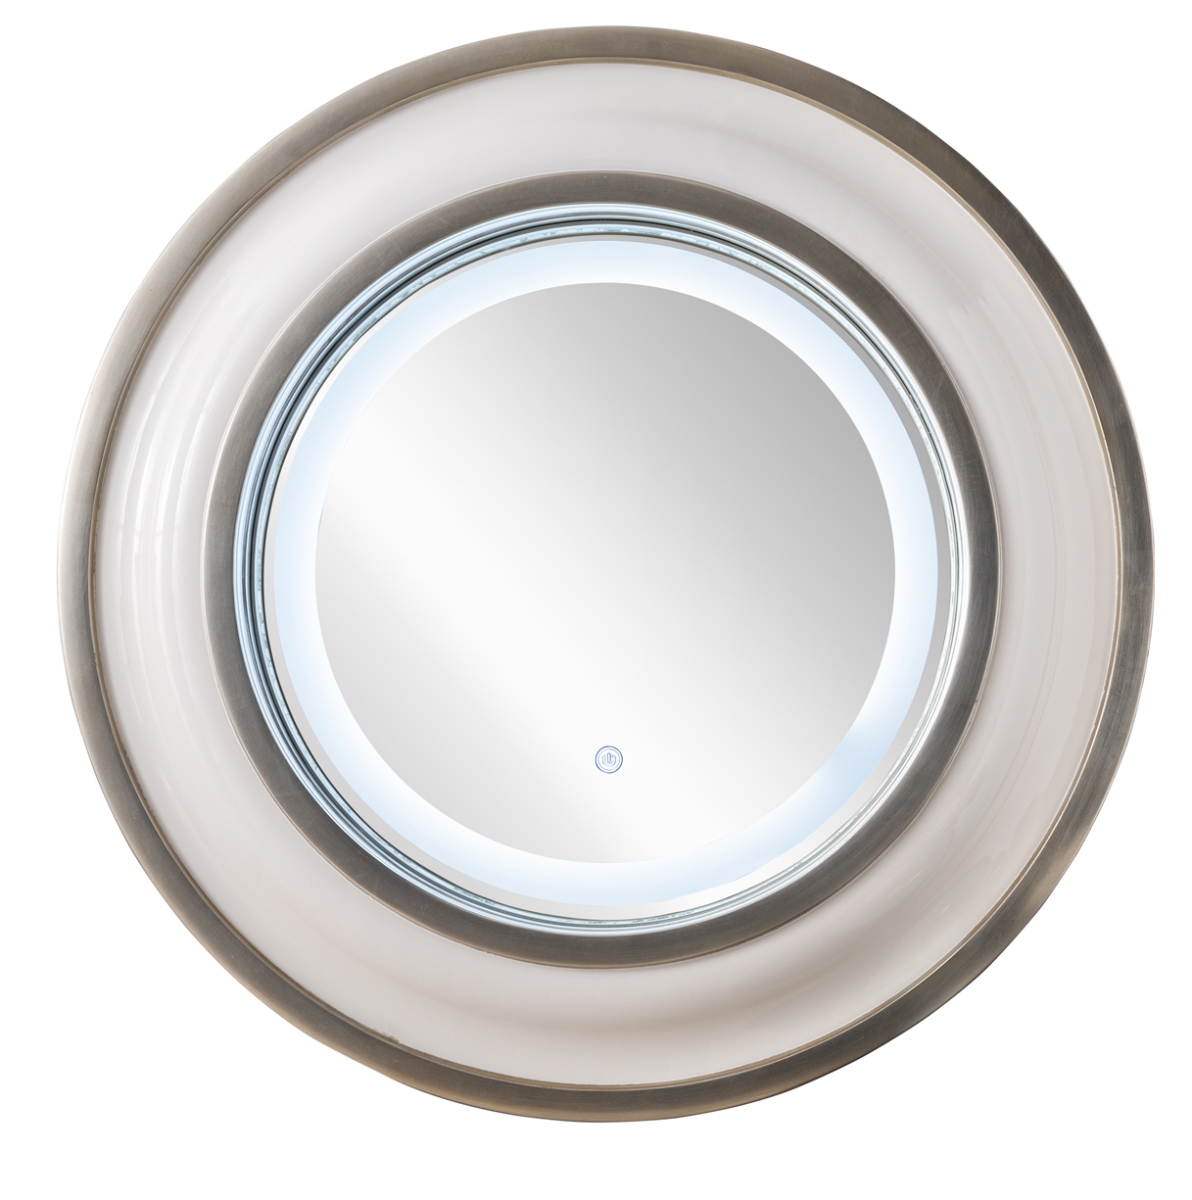 922-m36-bw-s 36 In. Rings Mirror, Bright White With Silver